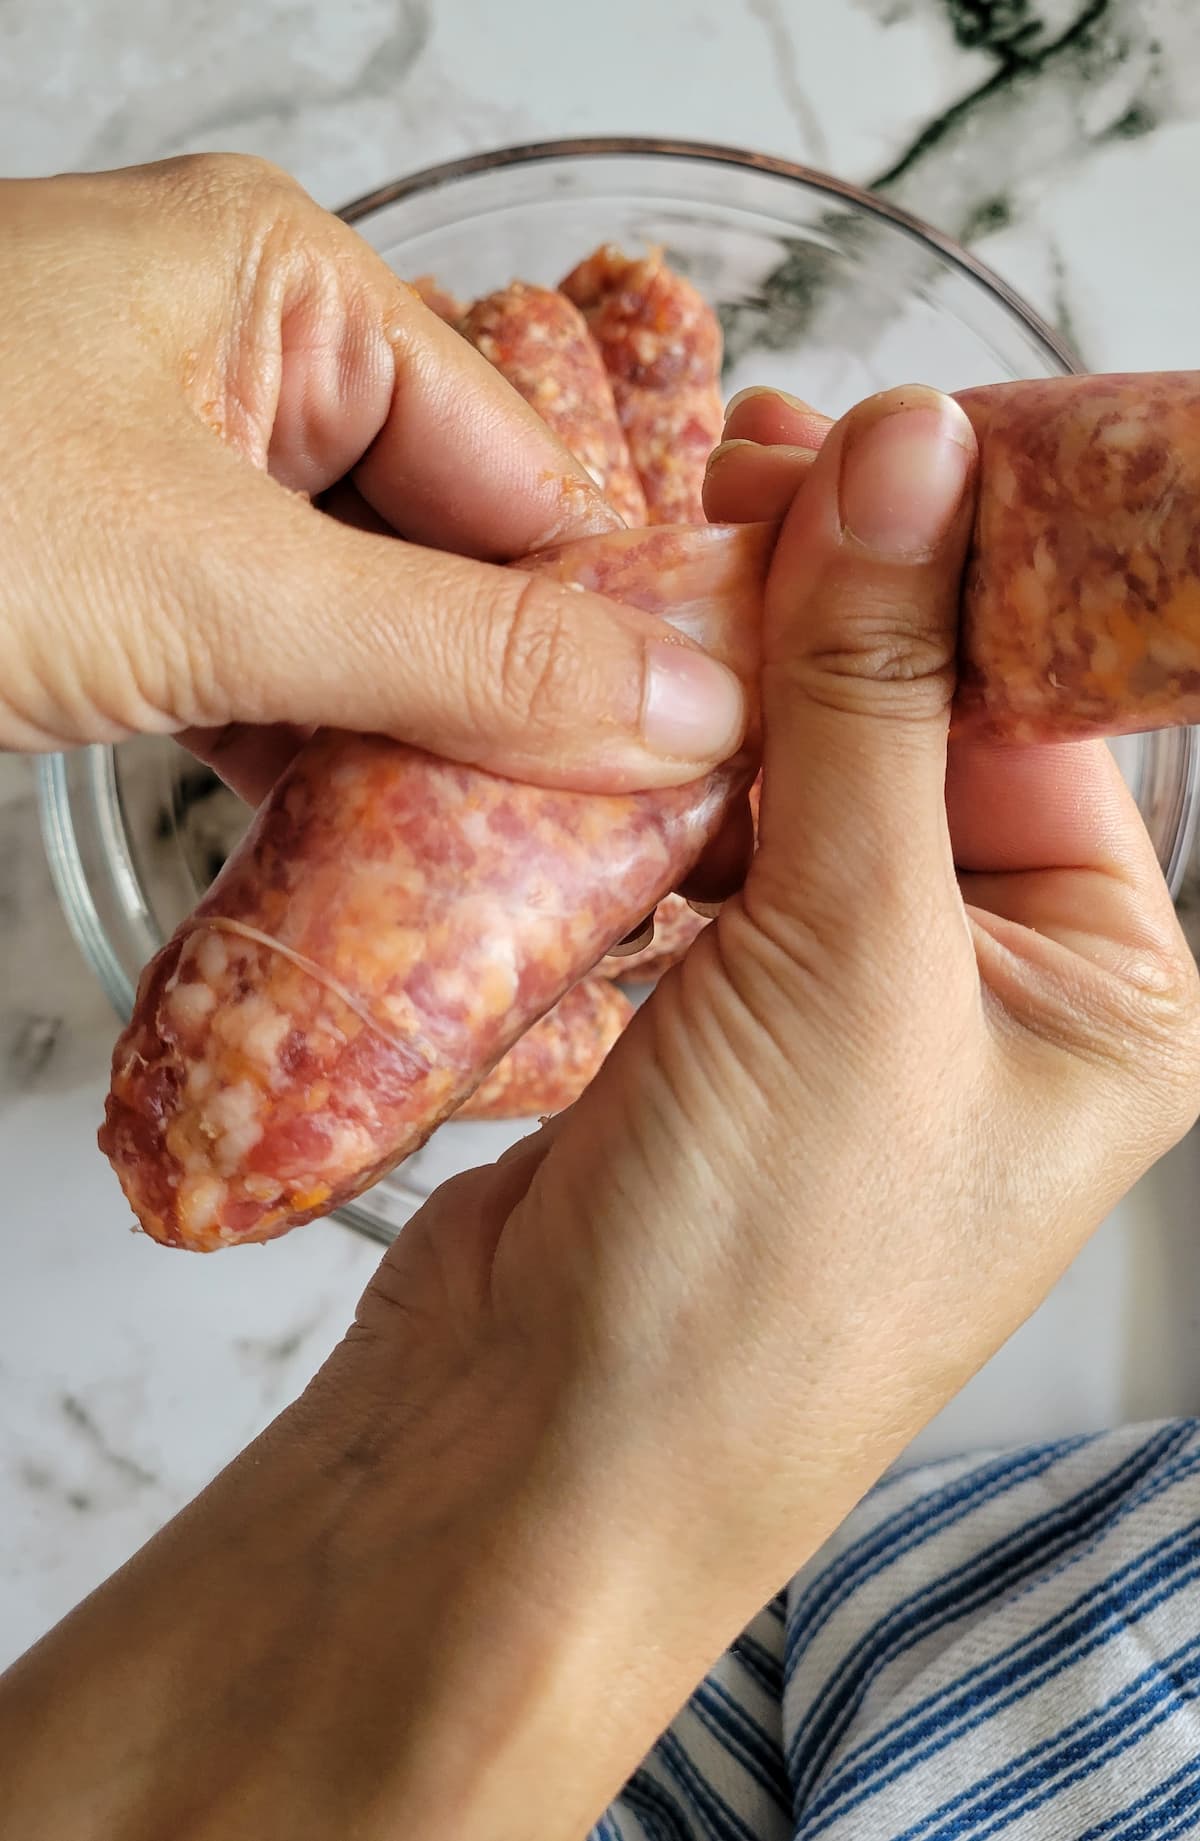 hands pushing sausage meat out of its casing